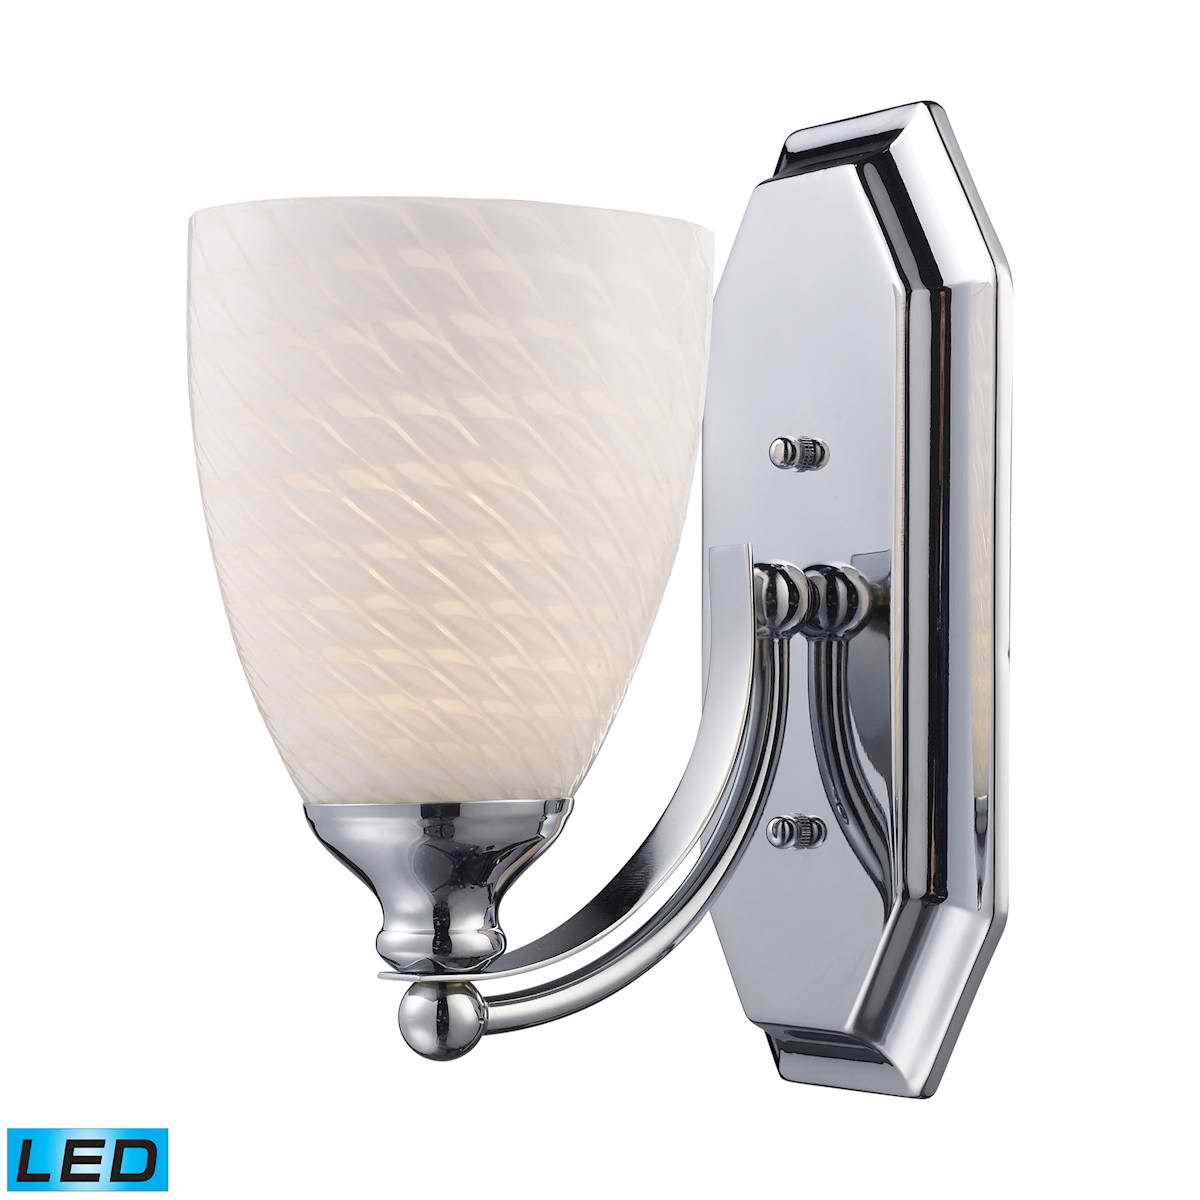 1 Light Vanity in Polished Chrome and White Swirl Glass - LED Offering Up To 800 Lumens (60 Watt Equivalent)